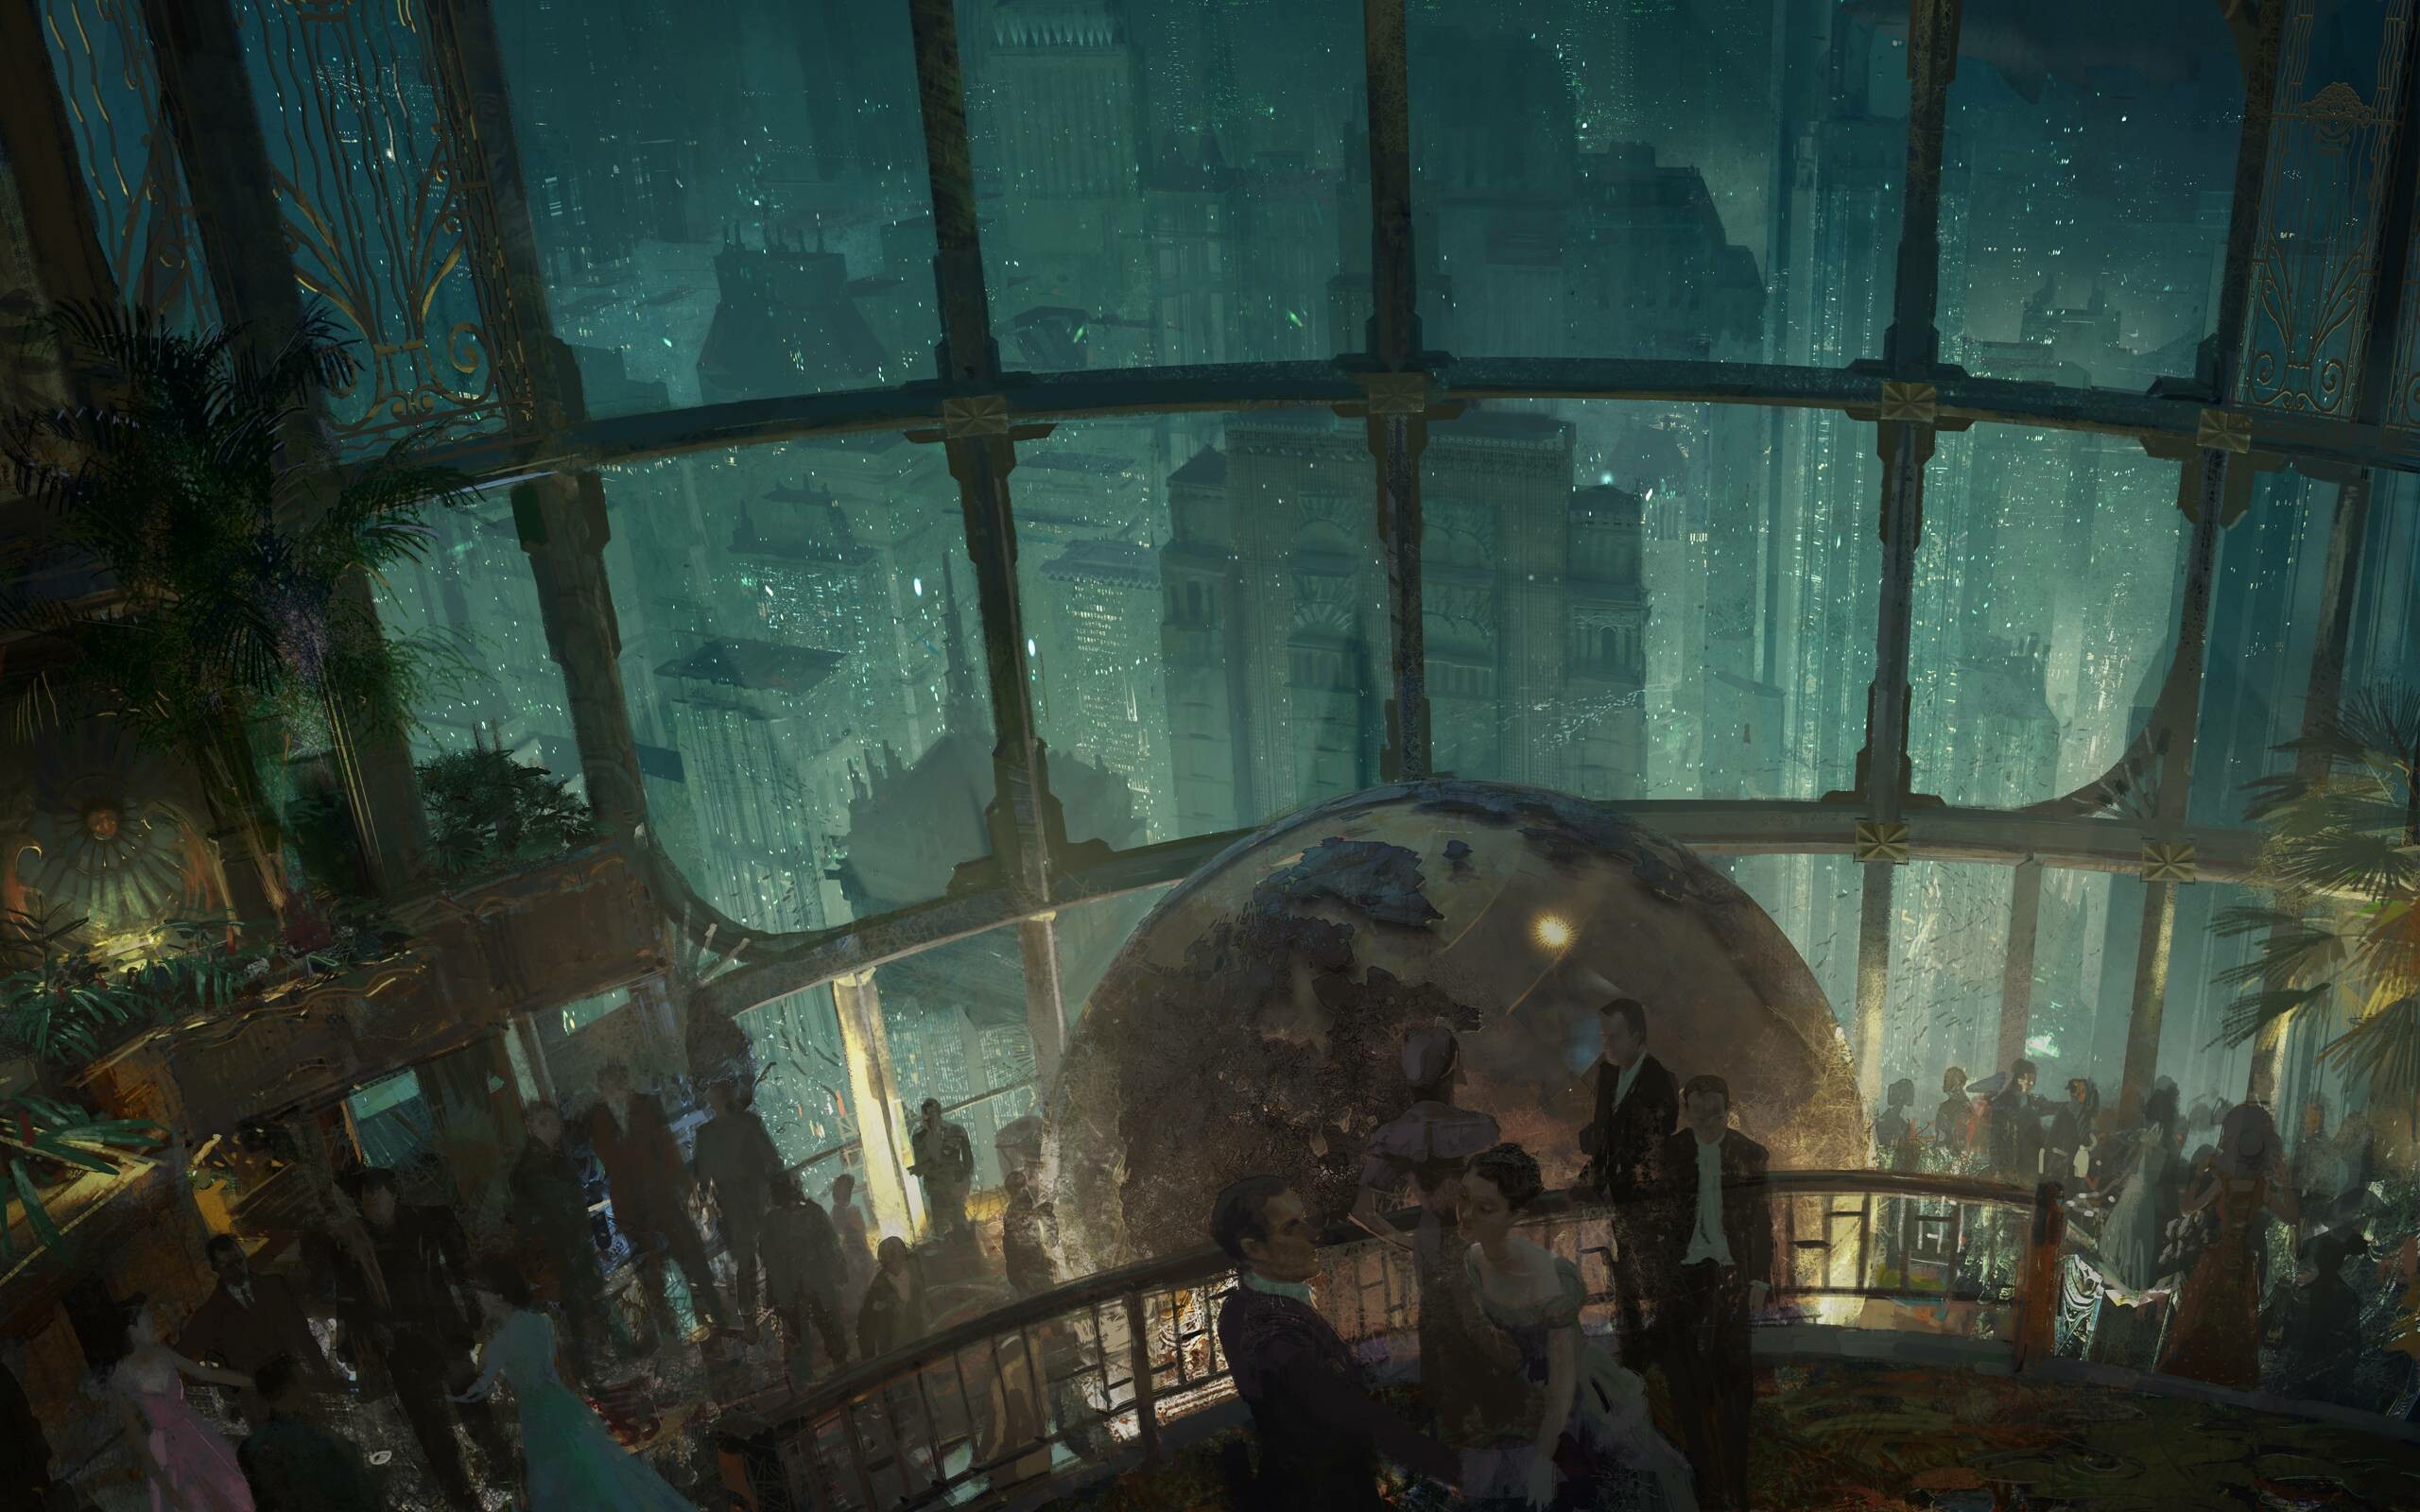 BioShock: An FPS with some RPG-like customization and crafting elements. 2560x1600 HD Wallpaper.